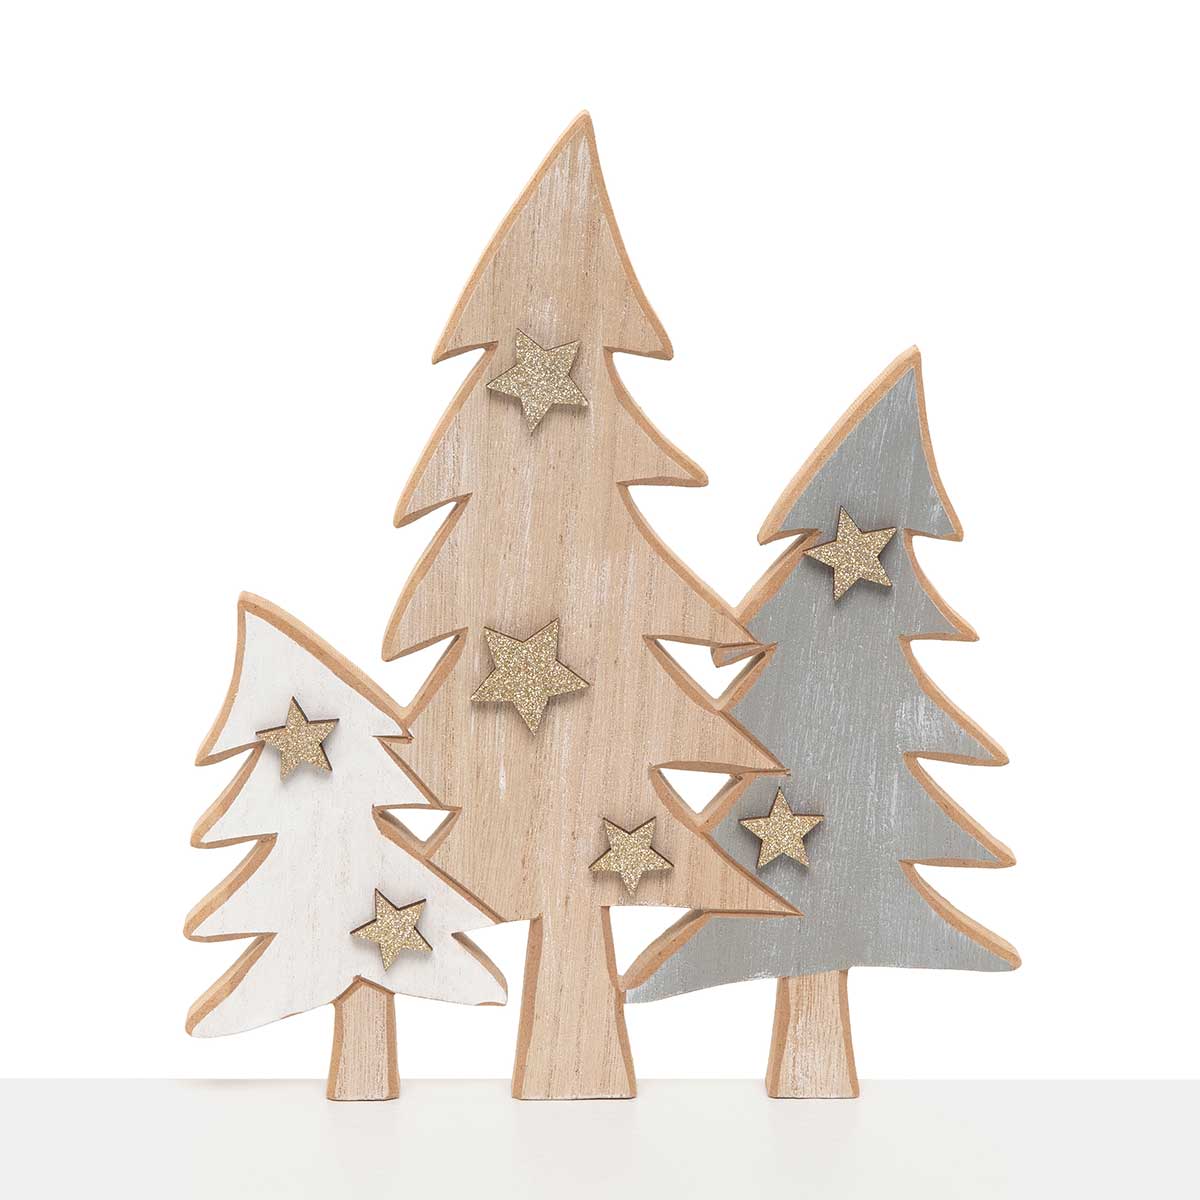 SIT-A-BOUT TRIO OF TREES 7.25IN X .75IN X 8.5IN NATURAL WOOD/GLI